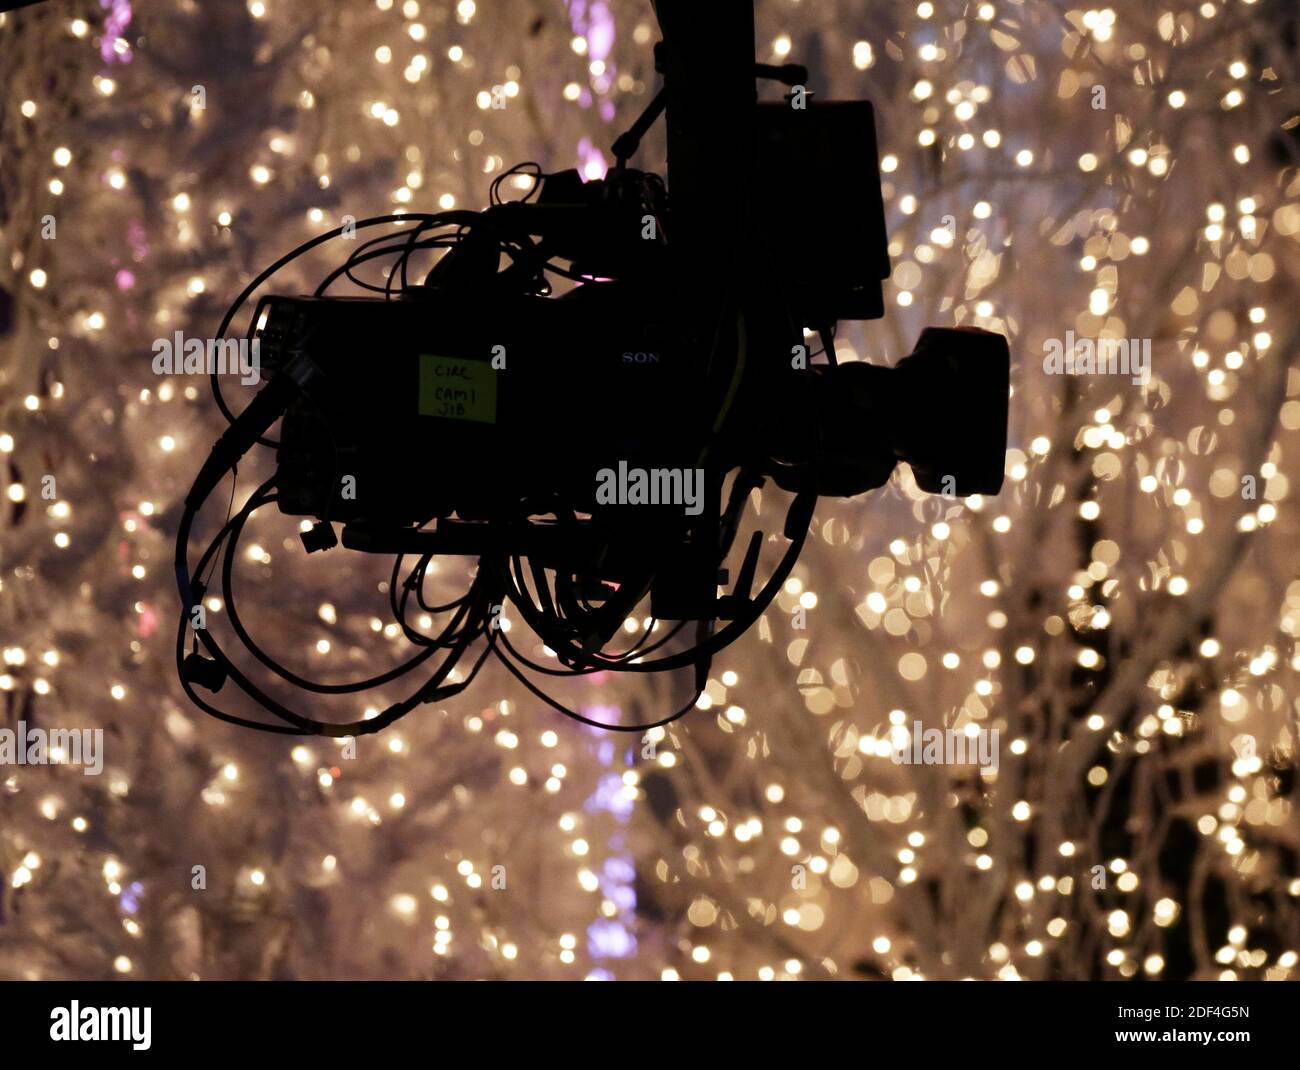 New York, United States. 03rd Dec, 2020. A camera films the recording of  the 88th annual Rockefeller Center Christmas Tree Lighting Ceremony at Rockefeller  Center in New York City on Wednesday, December